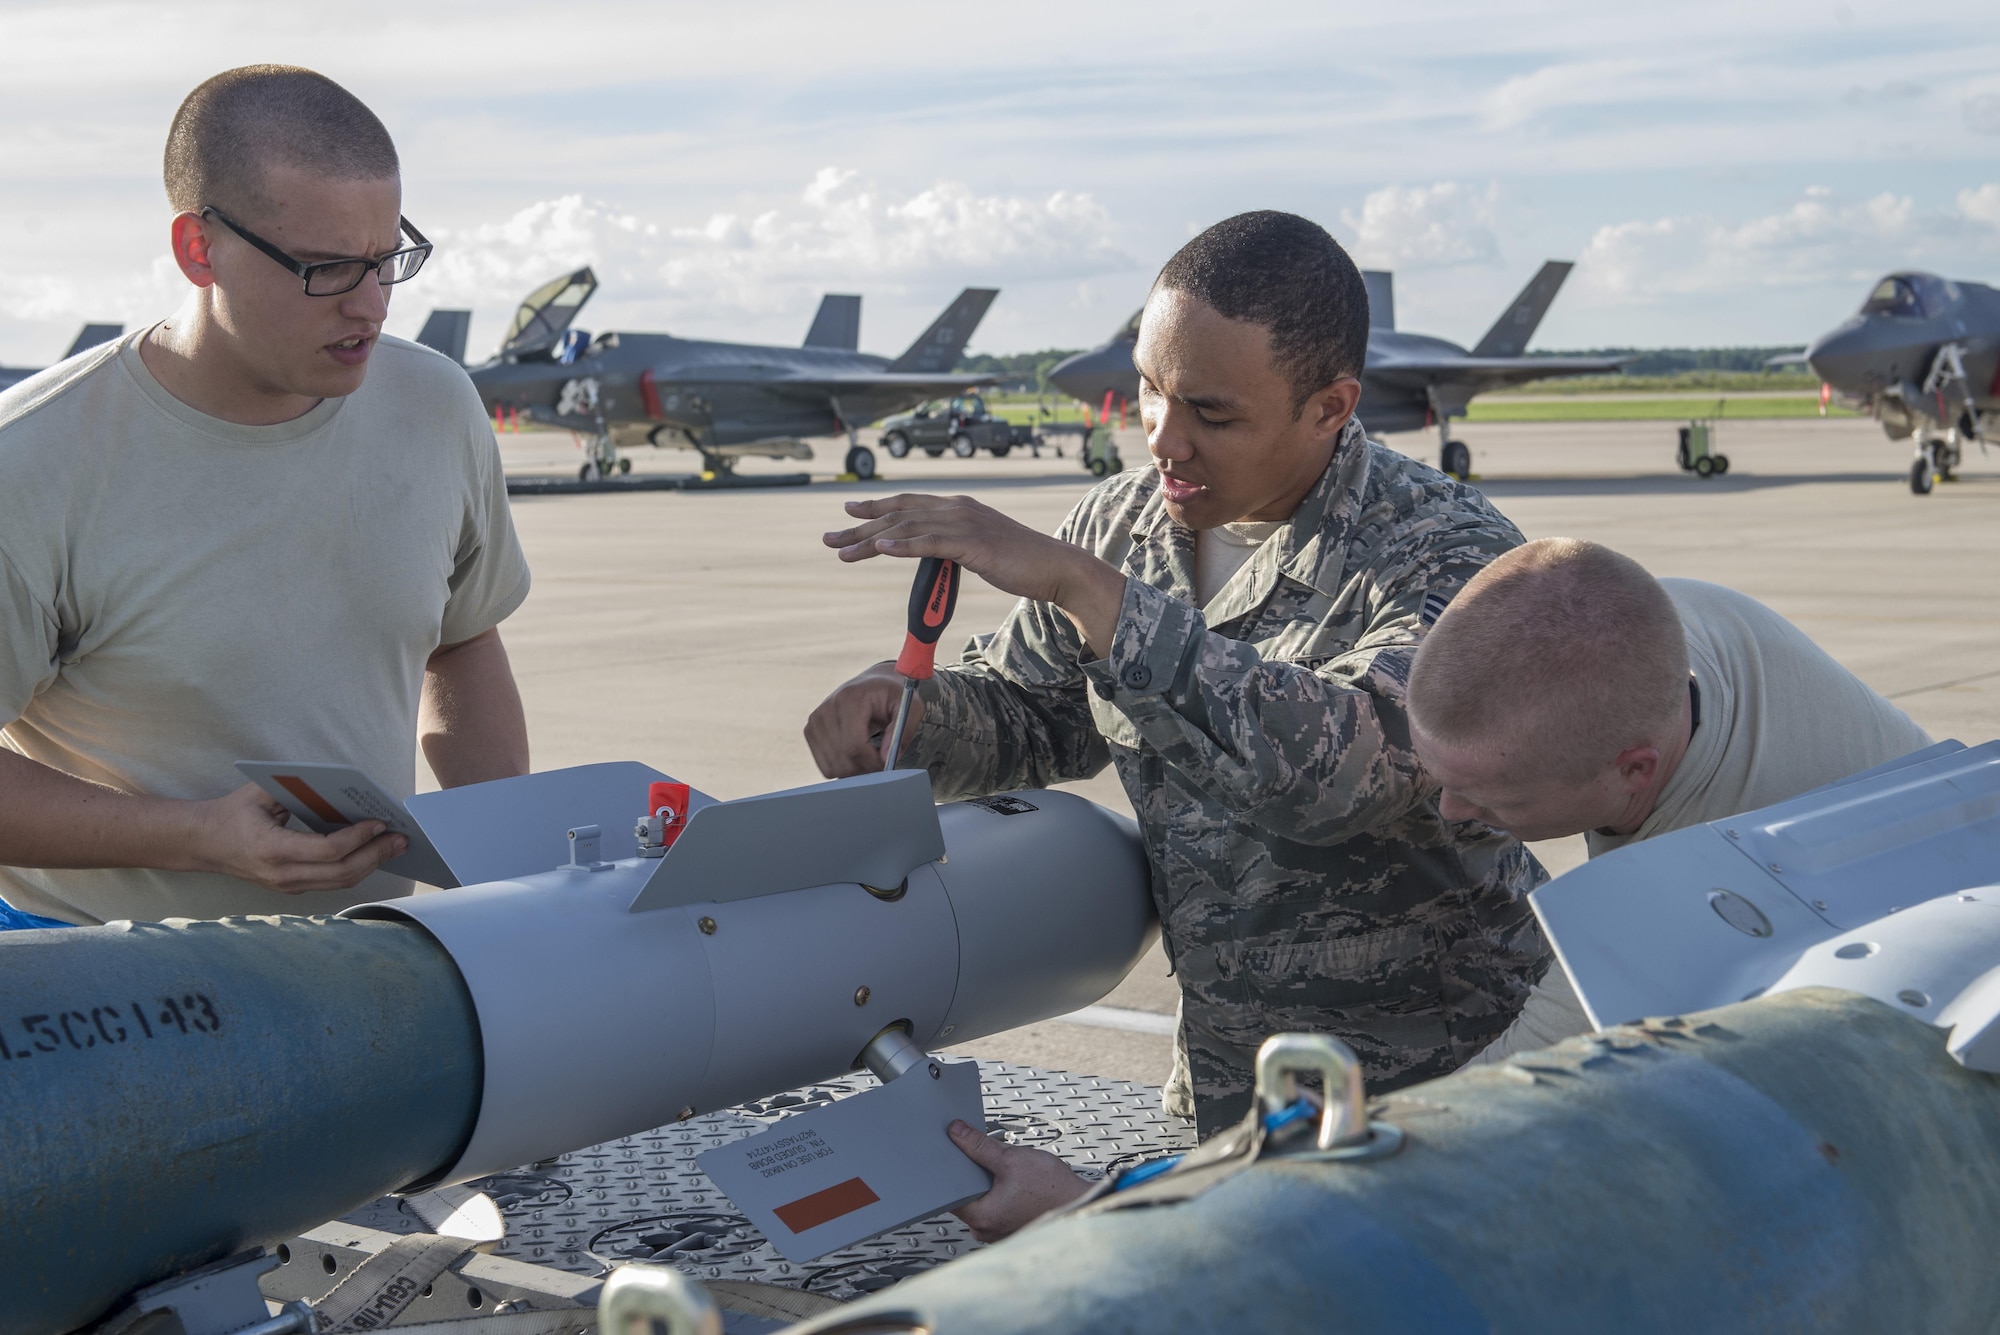 58th Aircraft Maintenance Unit weapons load crew members assemble a GBU-12 during Exercise Northern Lightning Aug. 30, 2016, at Volk Field, Wis. Northern Lightning is a joint total force exercise between the Air National Guard, Air Force and Navy conducting offensive counter air, suppression and destruction of enemy air defense and close air support. (U.S. Air Force photo by Senior Airman Stormy Archer)